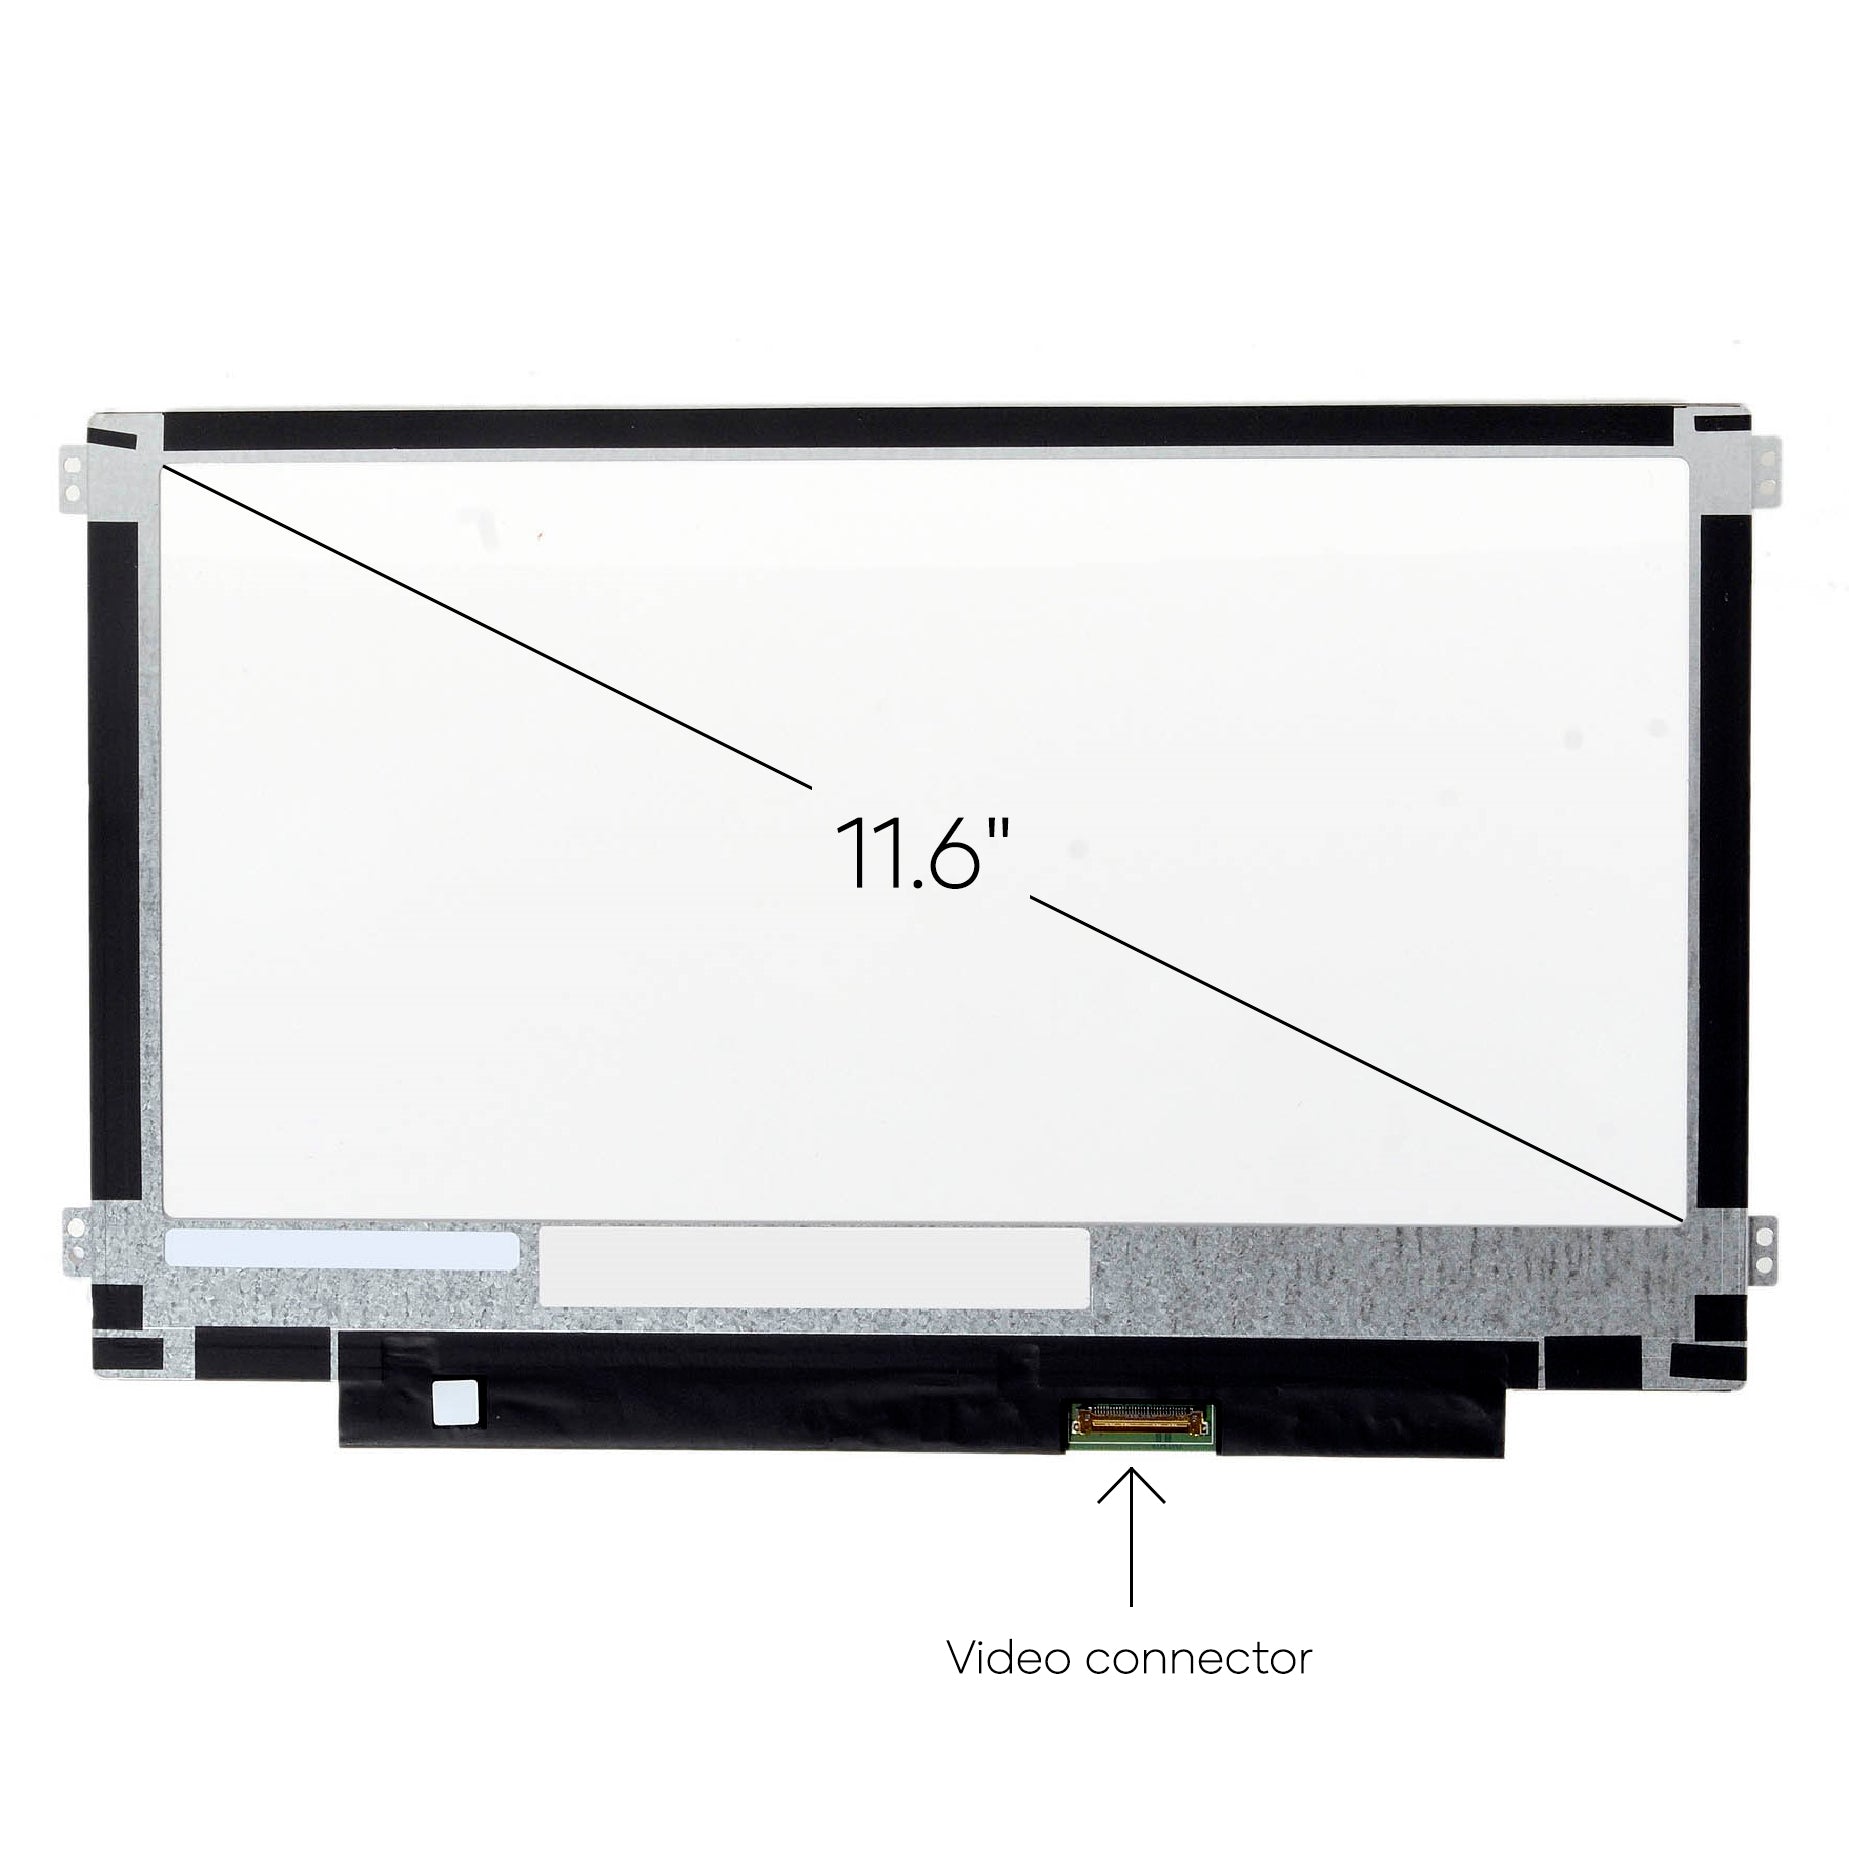 Screen Replacement for Samsung Chromebook XE501C13-S02US HD 1366x768 Matte LCD LED Display